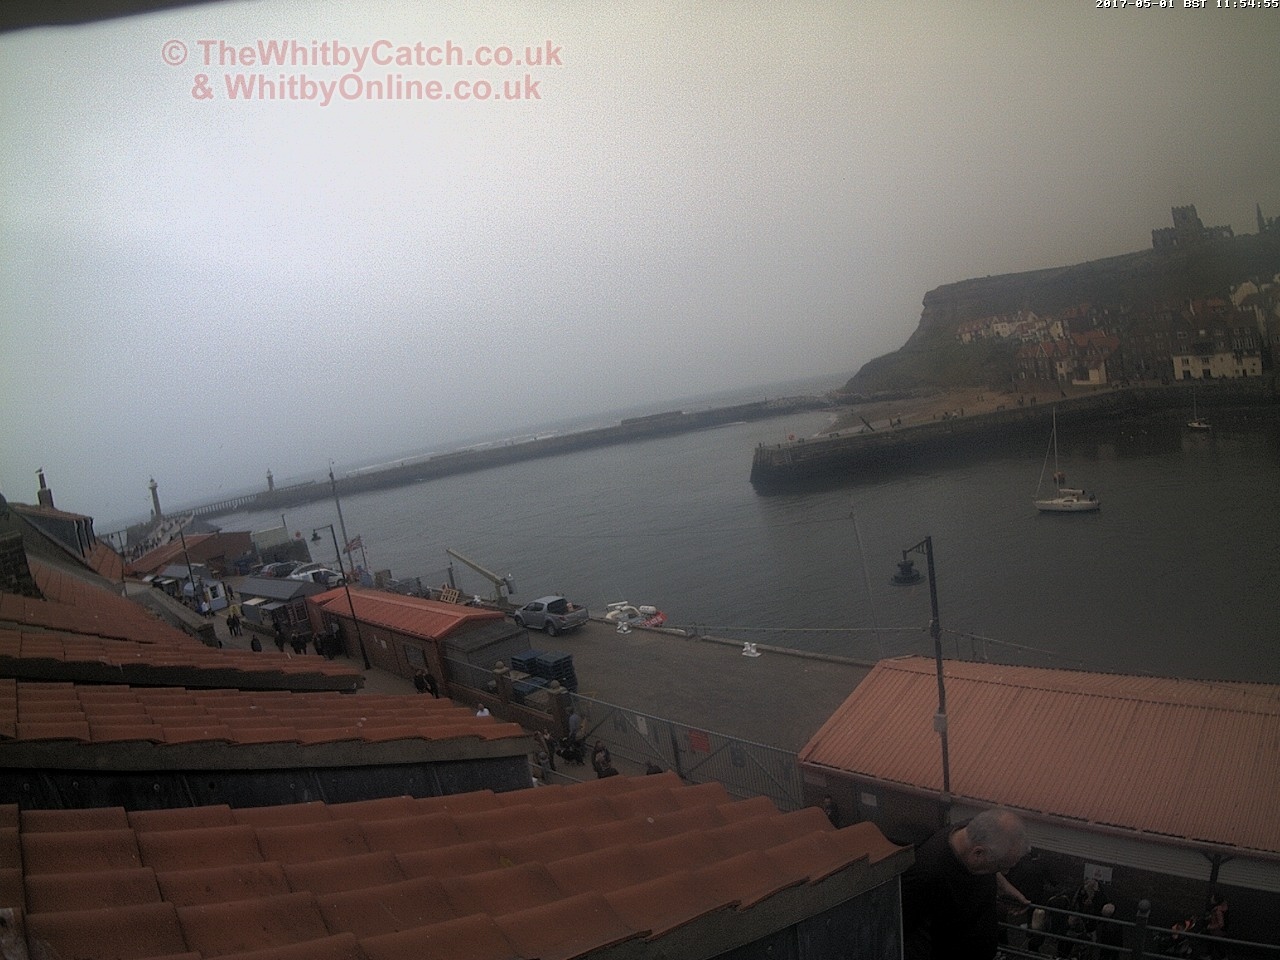 Whitby Mon 1st May 2017 11:55.